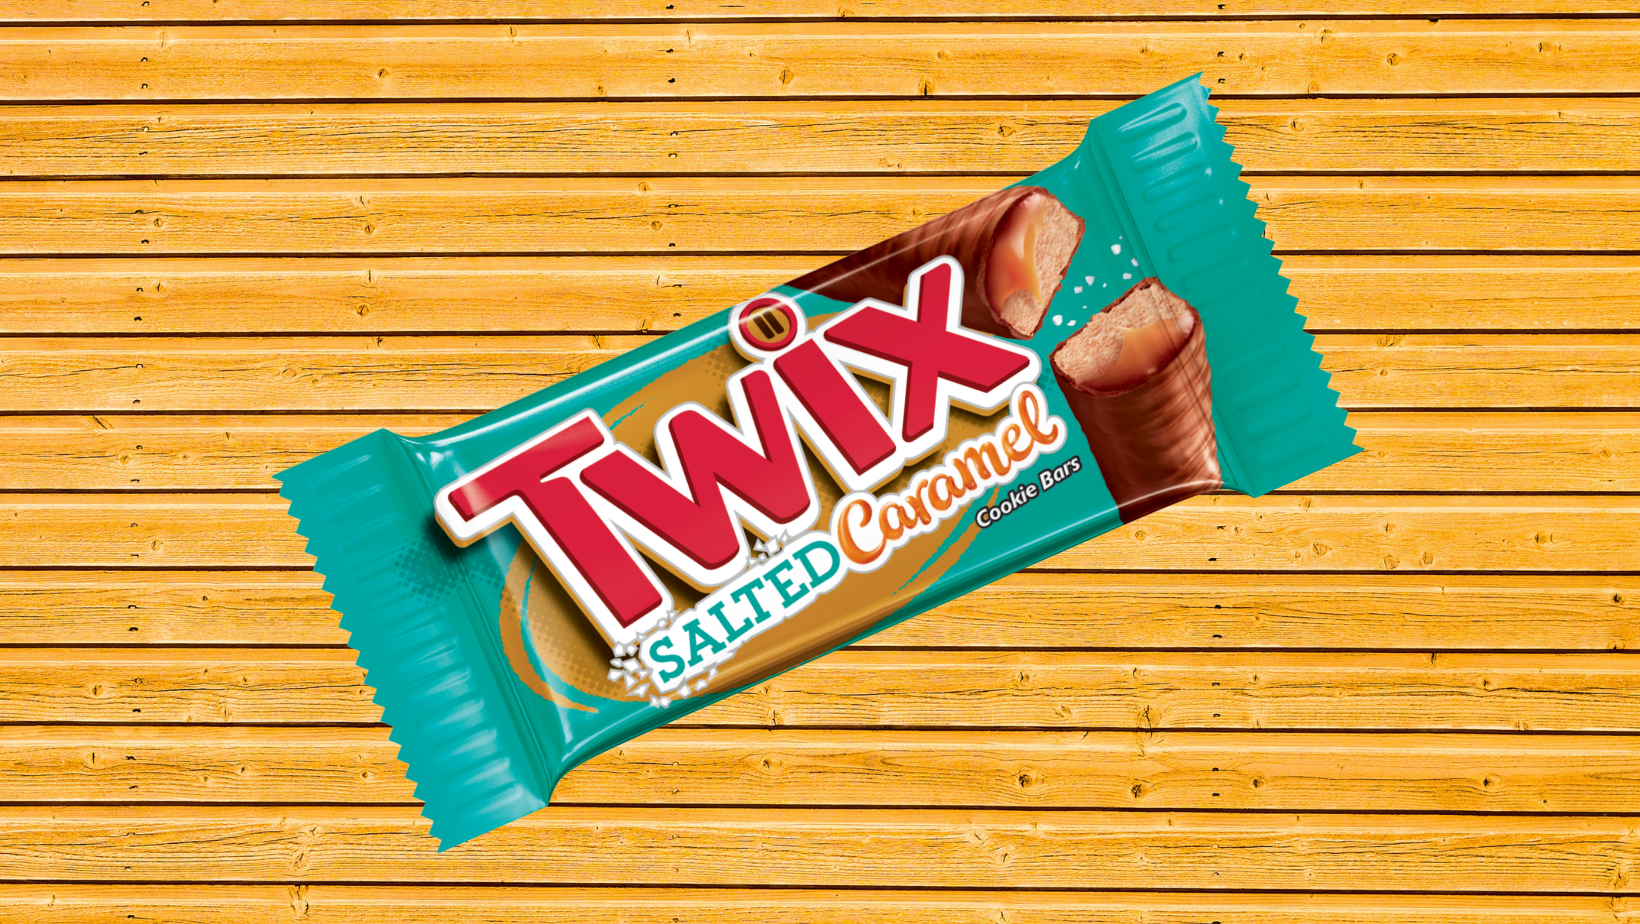 Twix Released 'Twix Shakers' Seasoning Blend That You Can